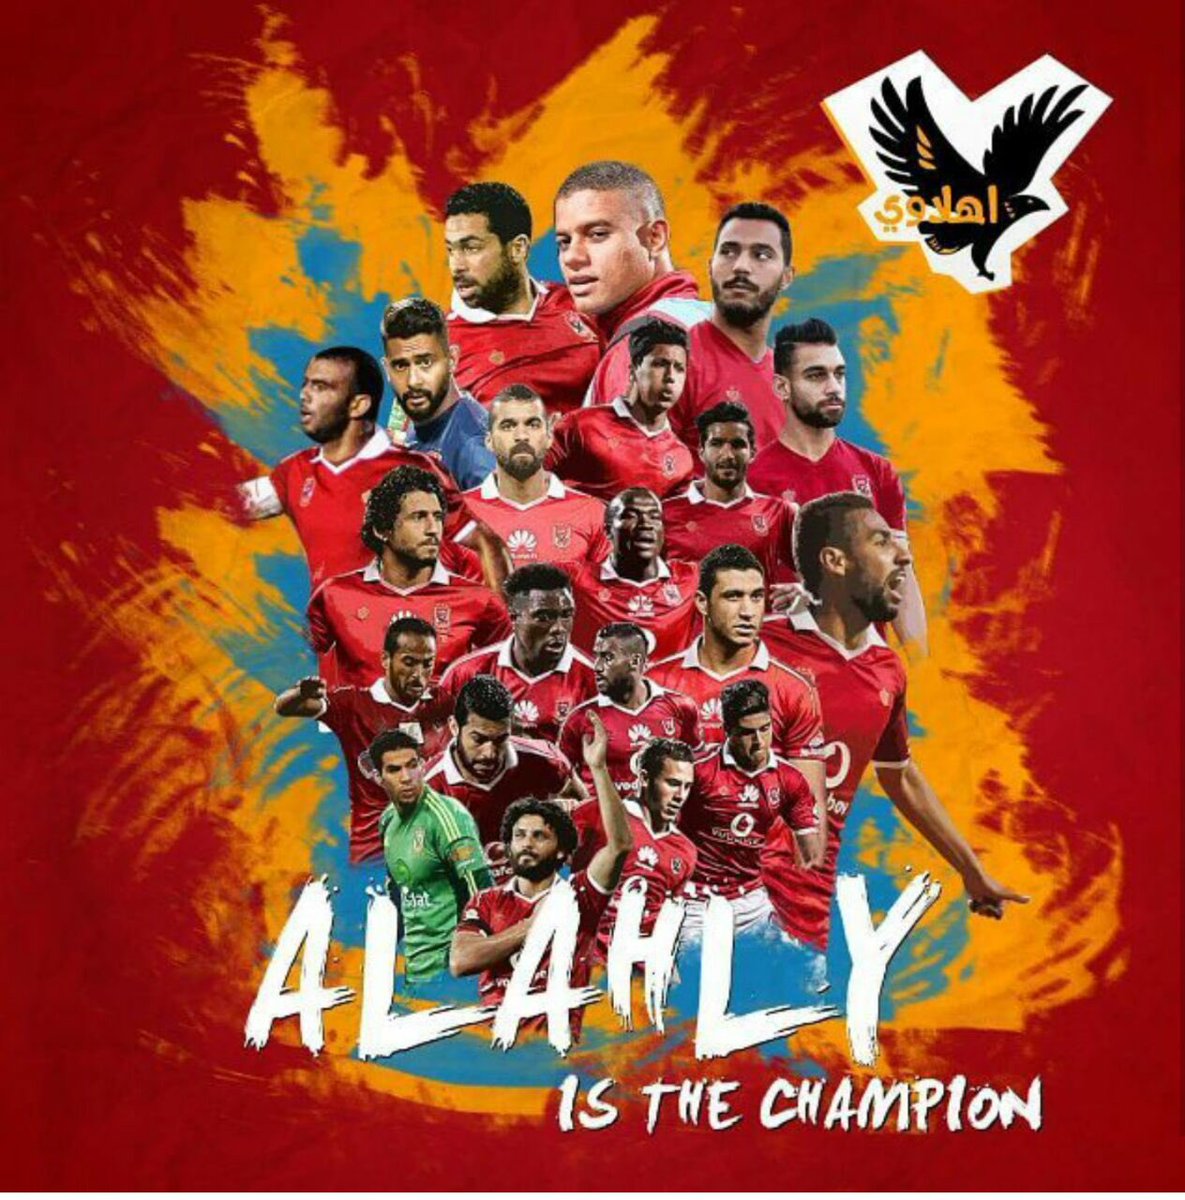 John Antwi wins Egyptian League Title with Al Ahly